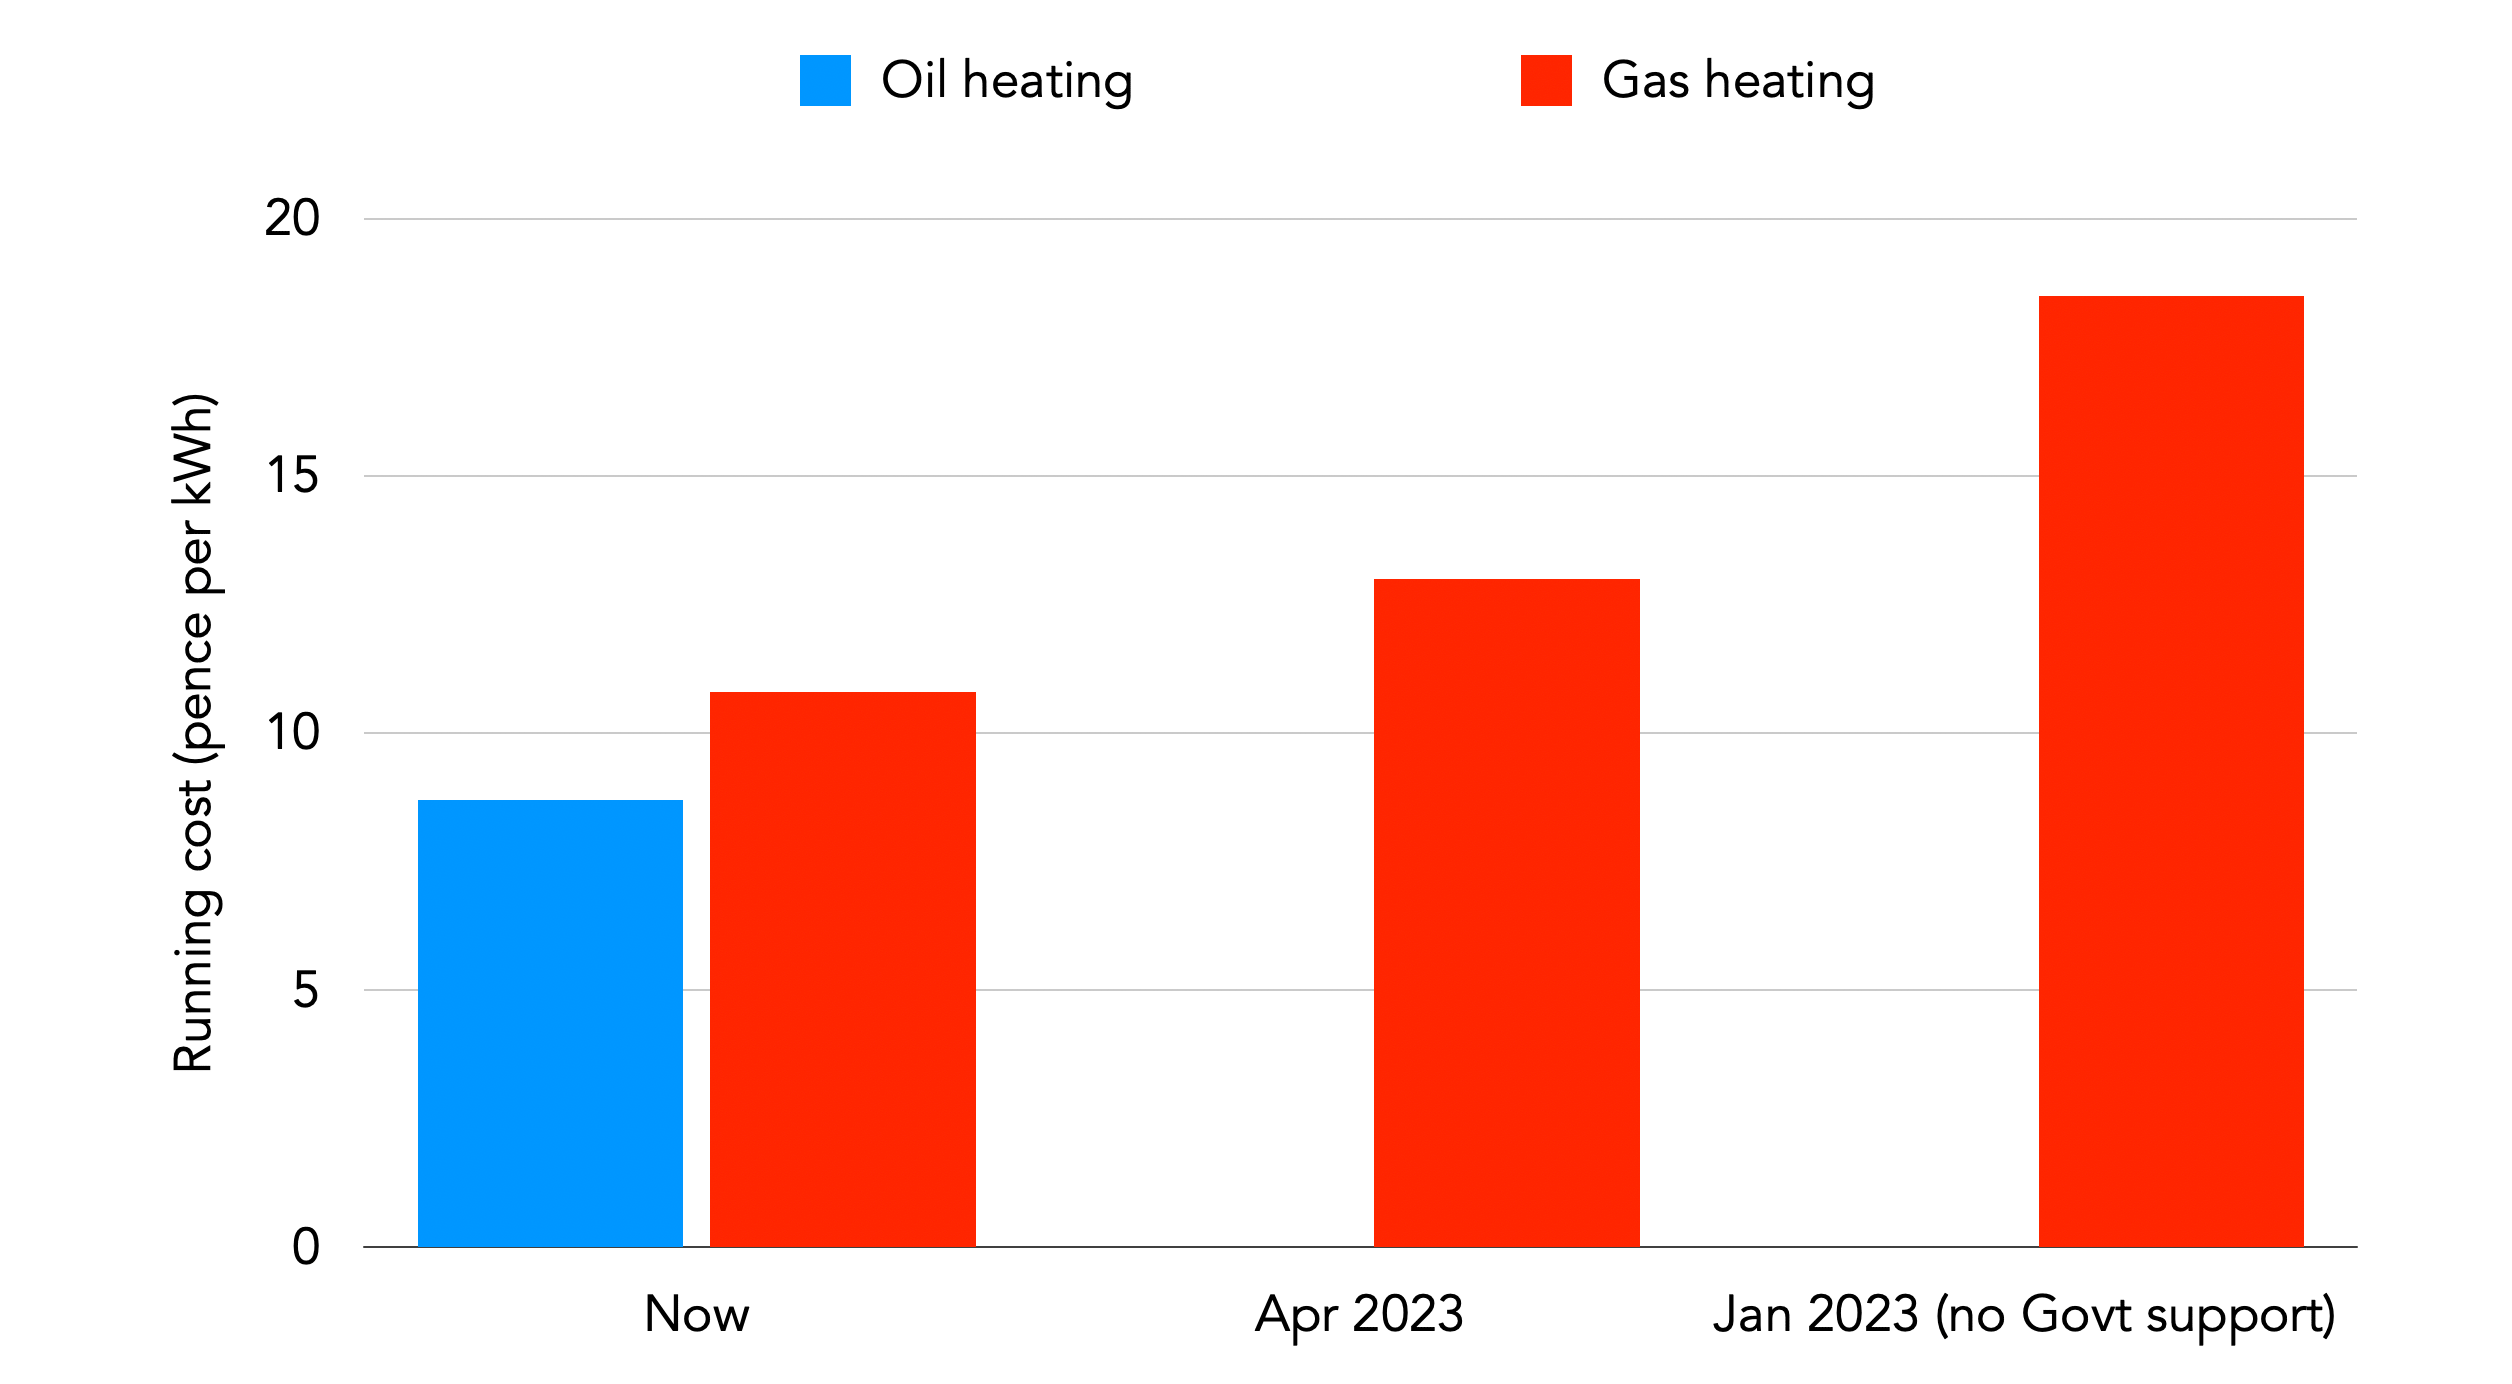 Running costs of oil and gas heating